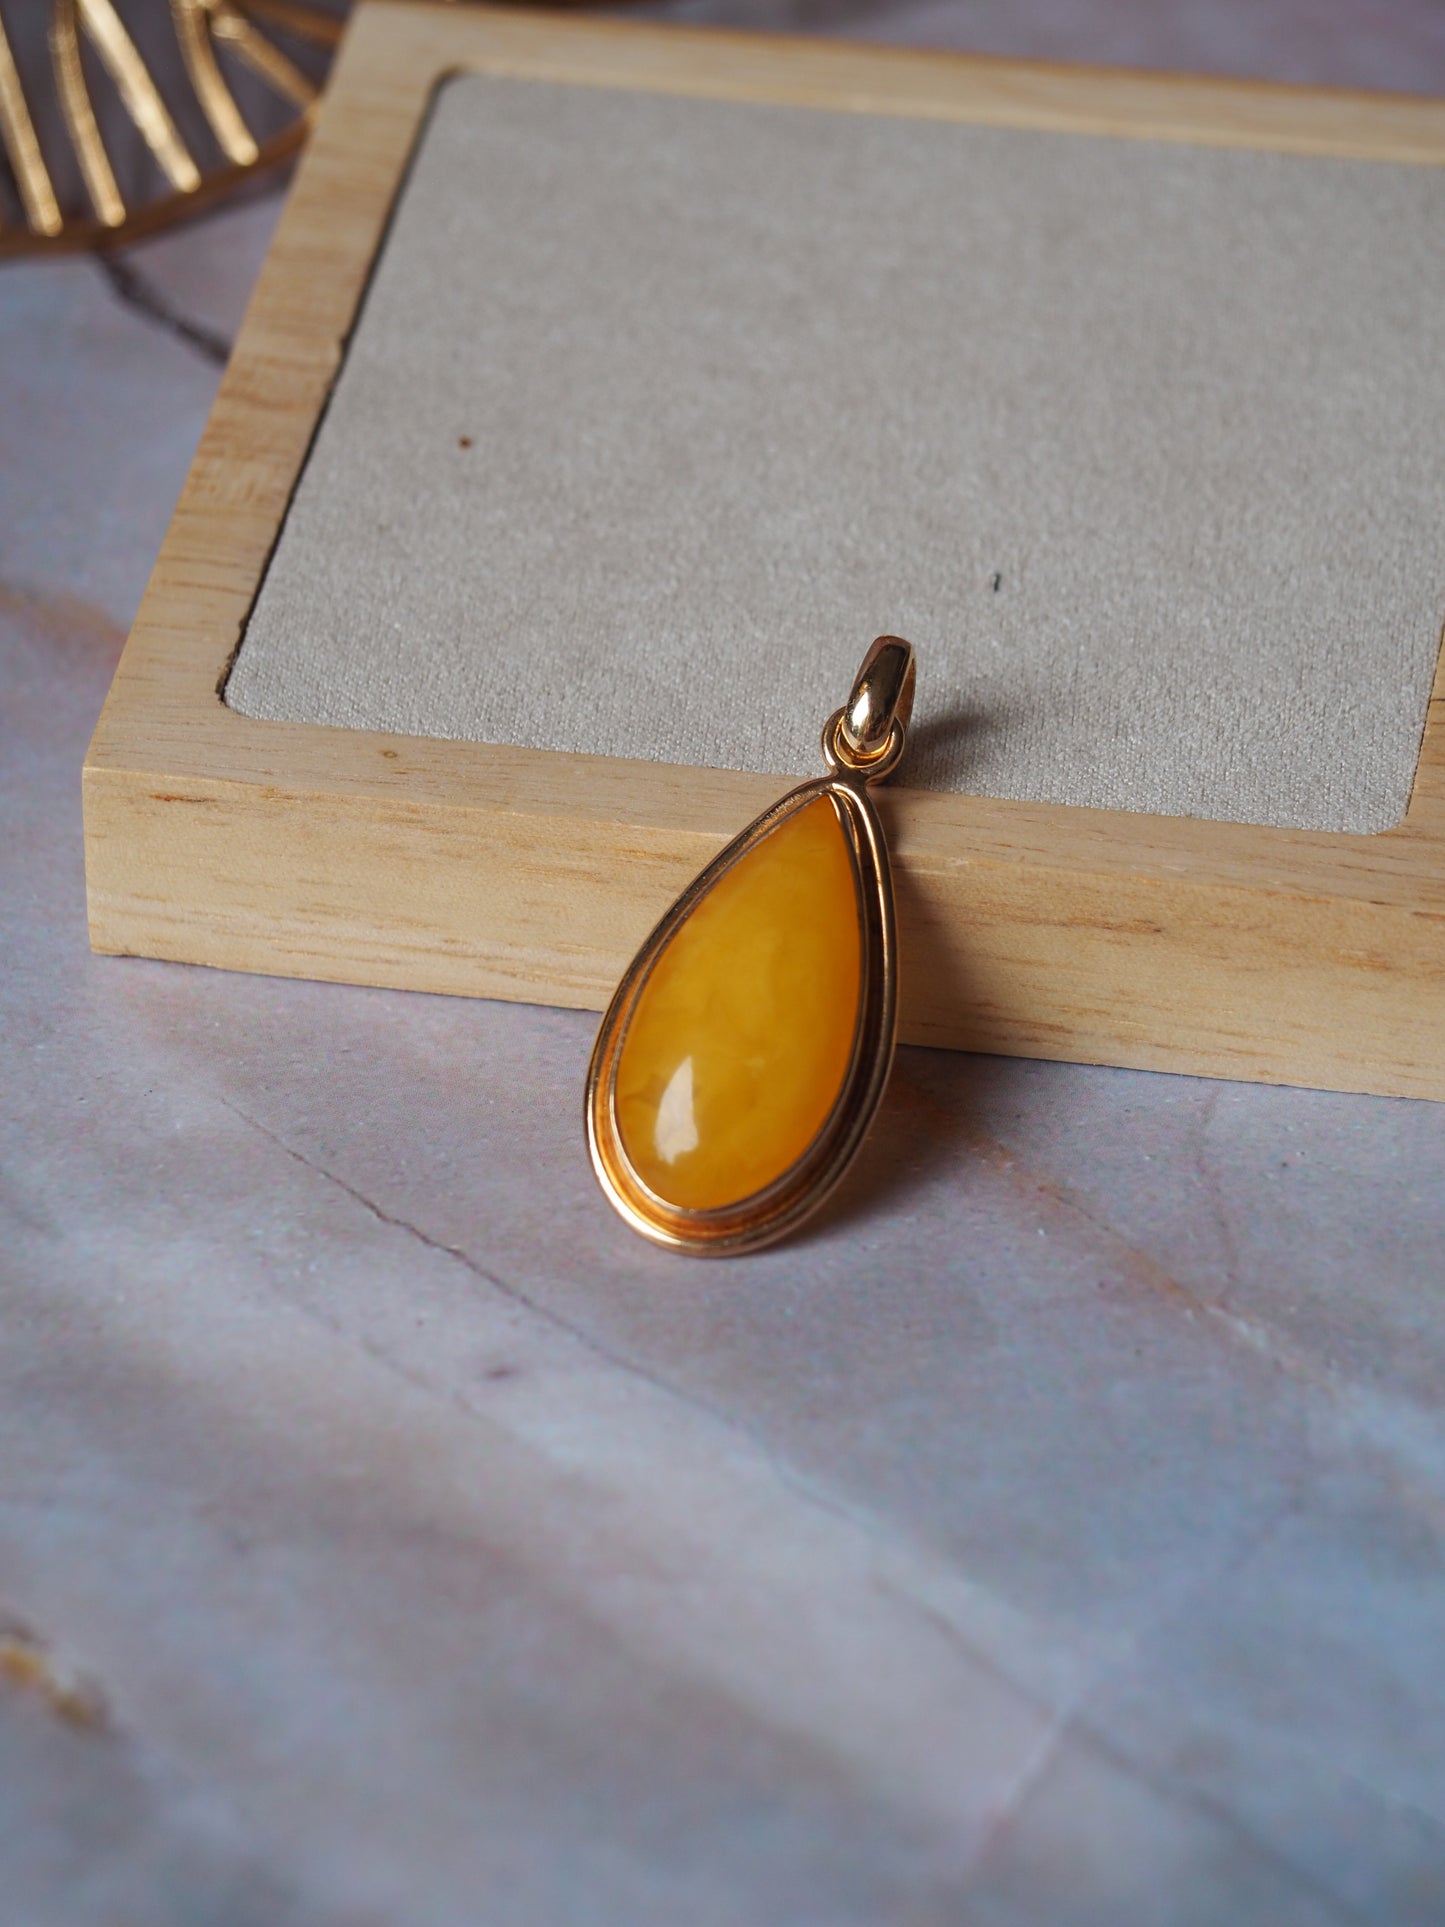 Honey Amber Tear Drop Shape Pendant in Rose Gold Plated Silver Frame